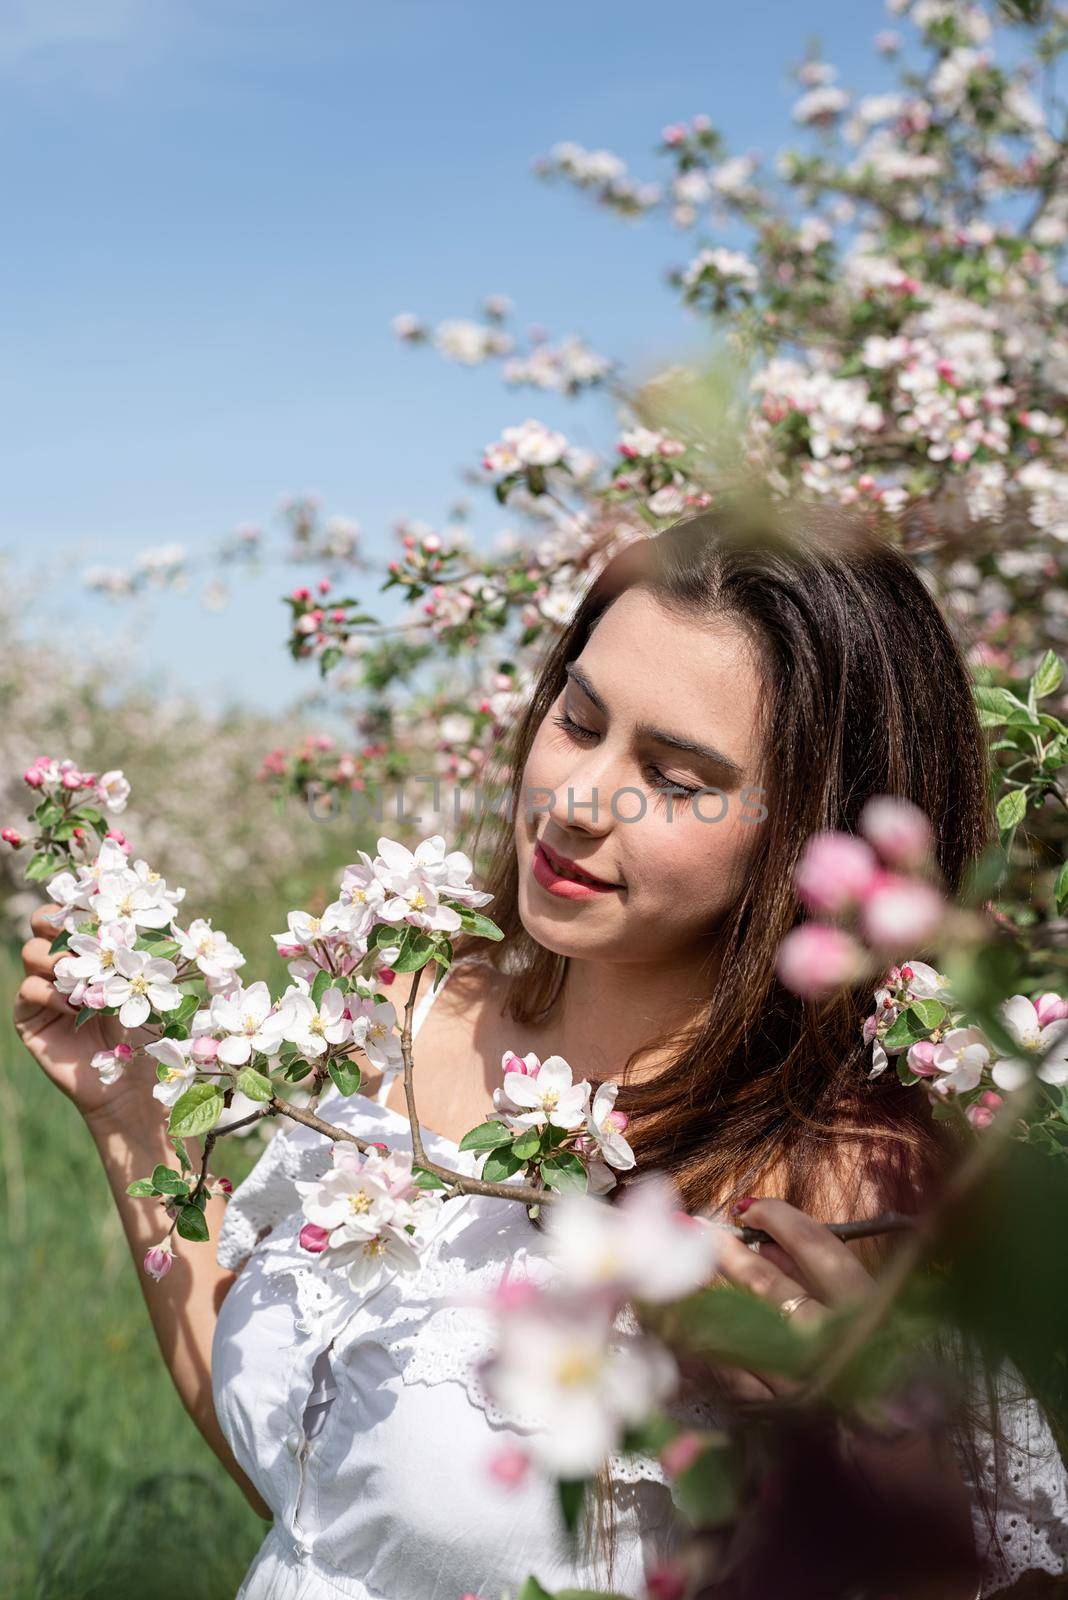 Spring concept. Nature. Young caucasian woman in white summer dress enjoying the flowering of an apple trees, walking in spring apple gardens